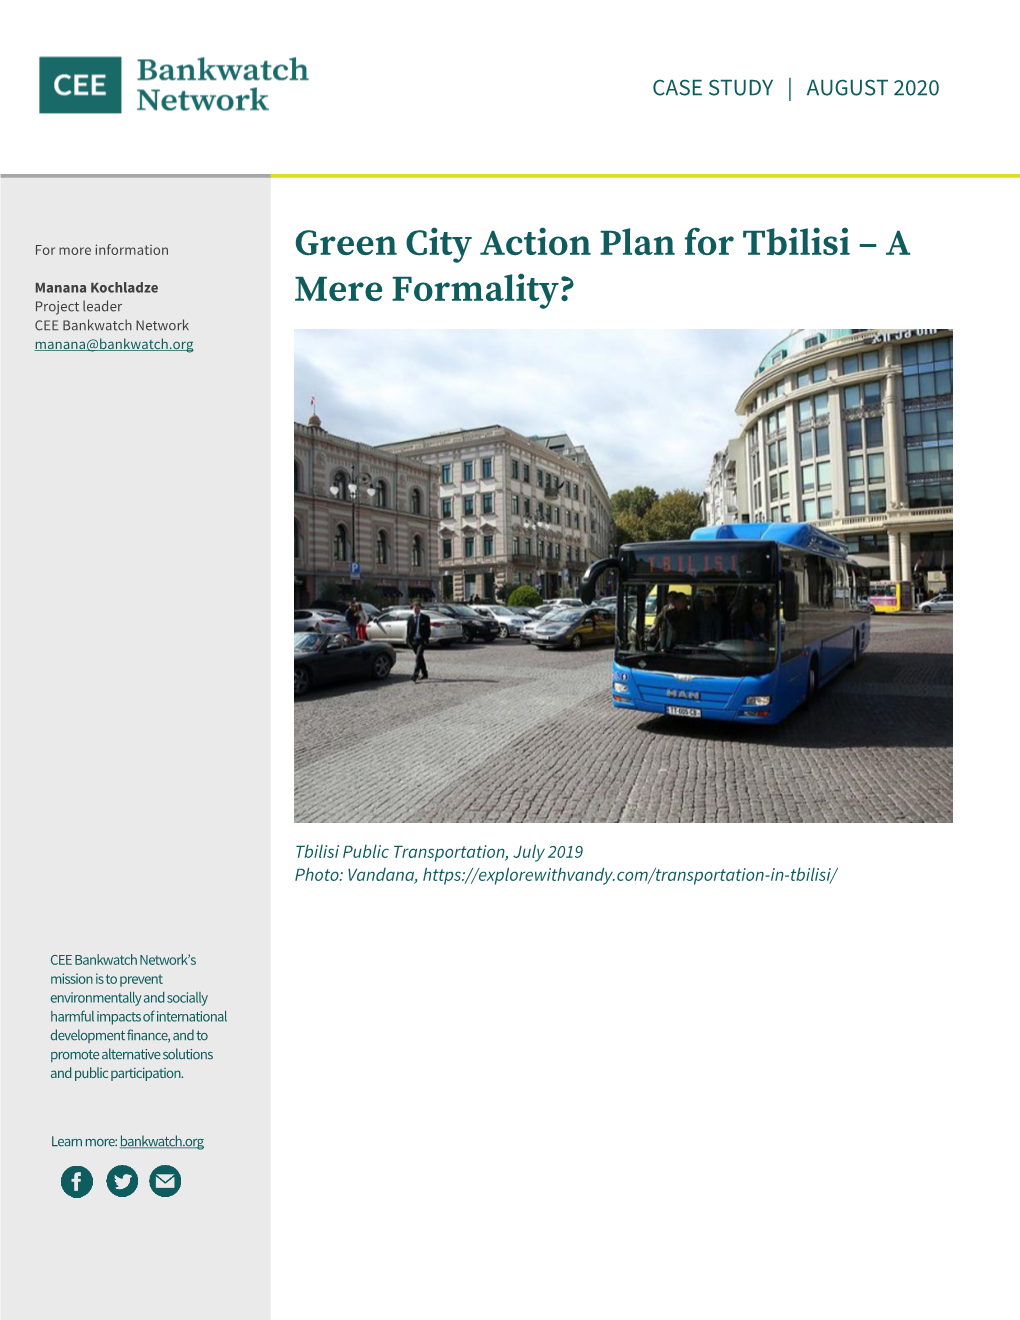 Green City Action Plan for Tbilisi – a Mere Formality?